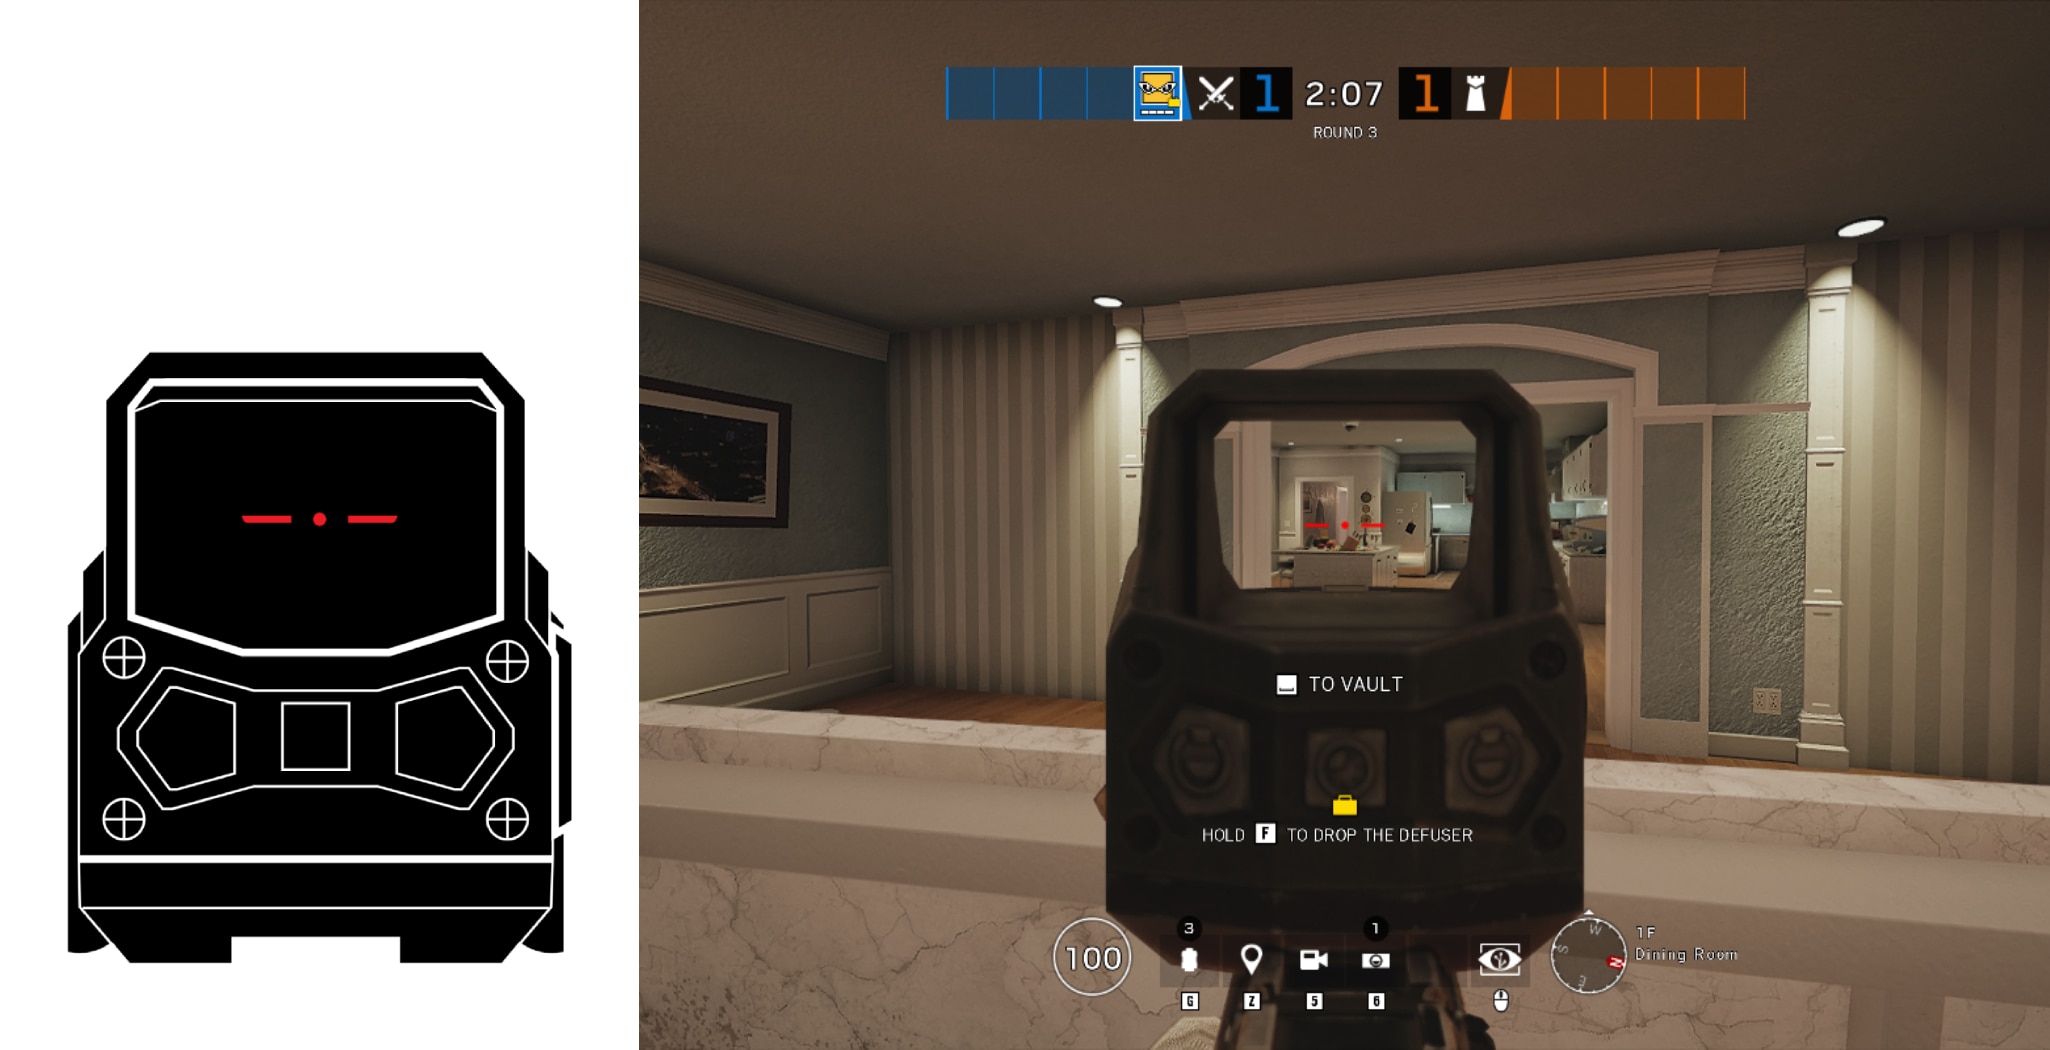 [R6S] Y5S3 New Holo Sight